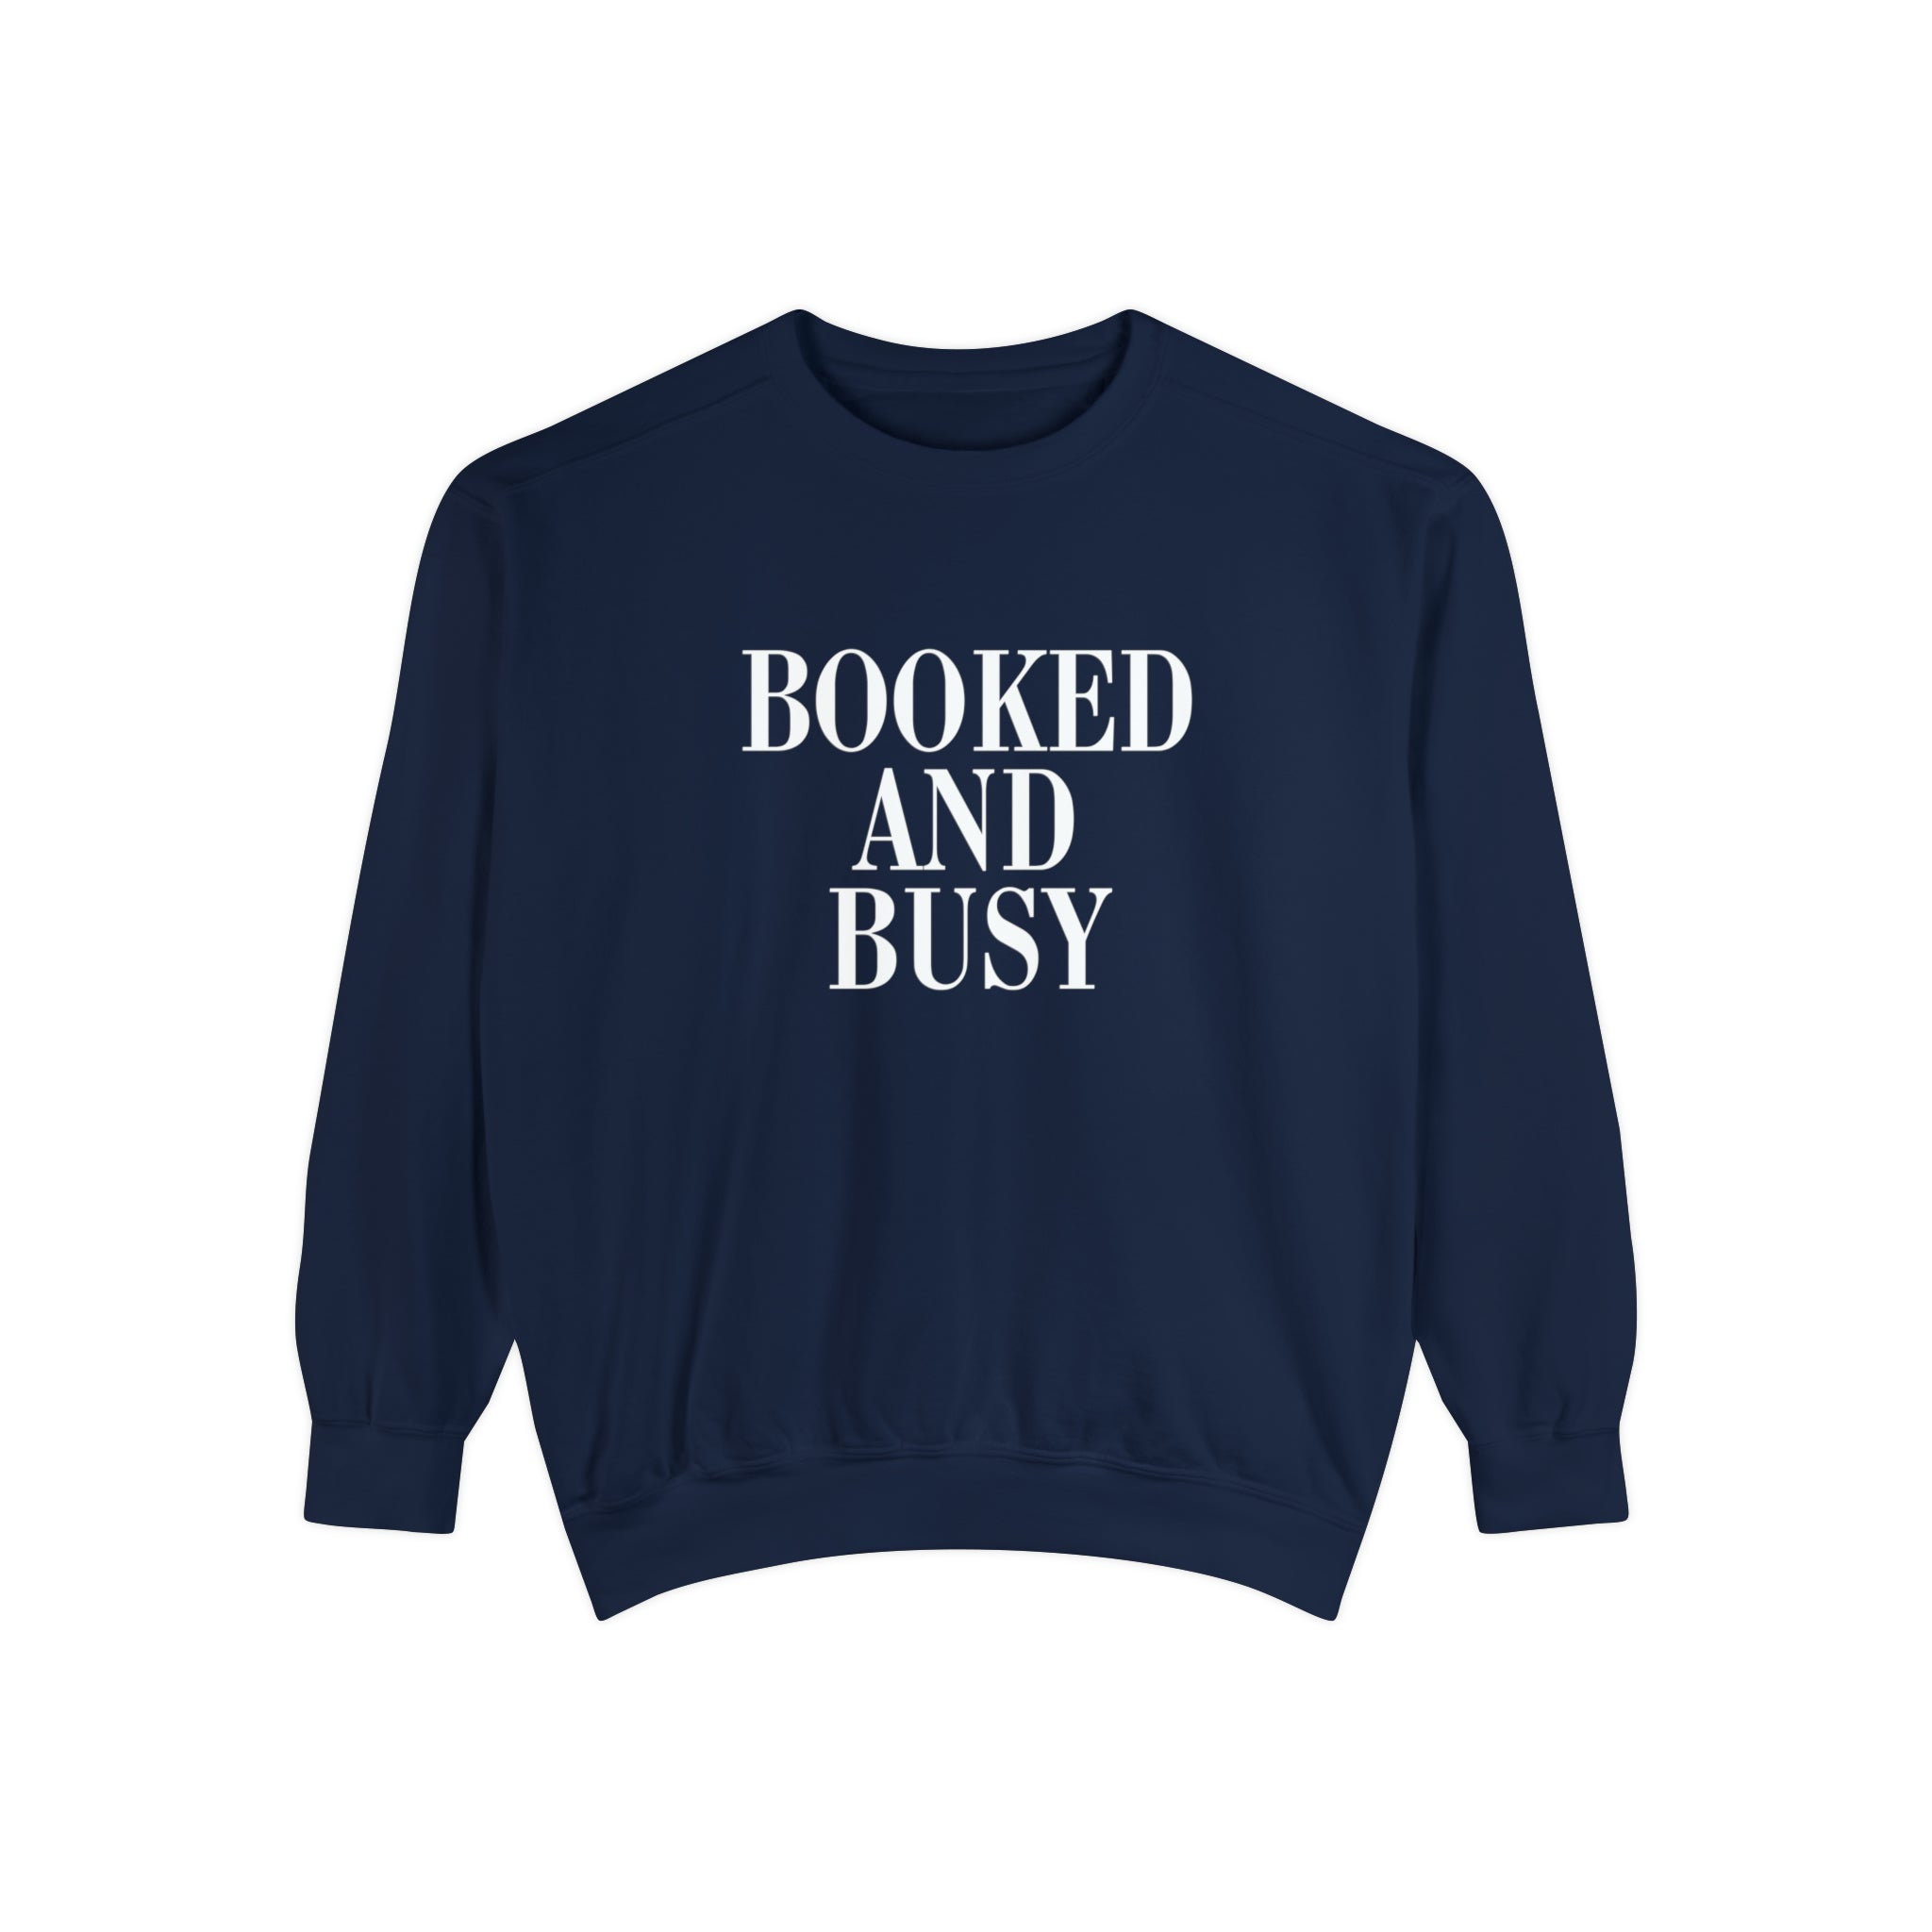 Booked and Busy Comfort Colors Crewneck Sweatshirt